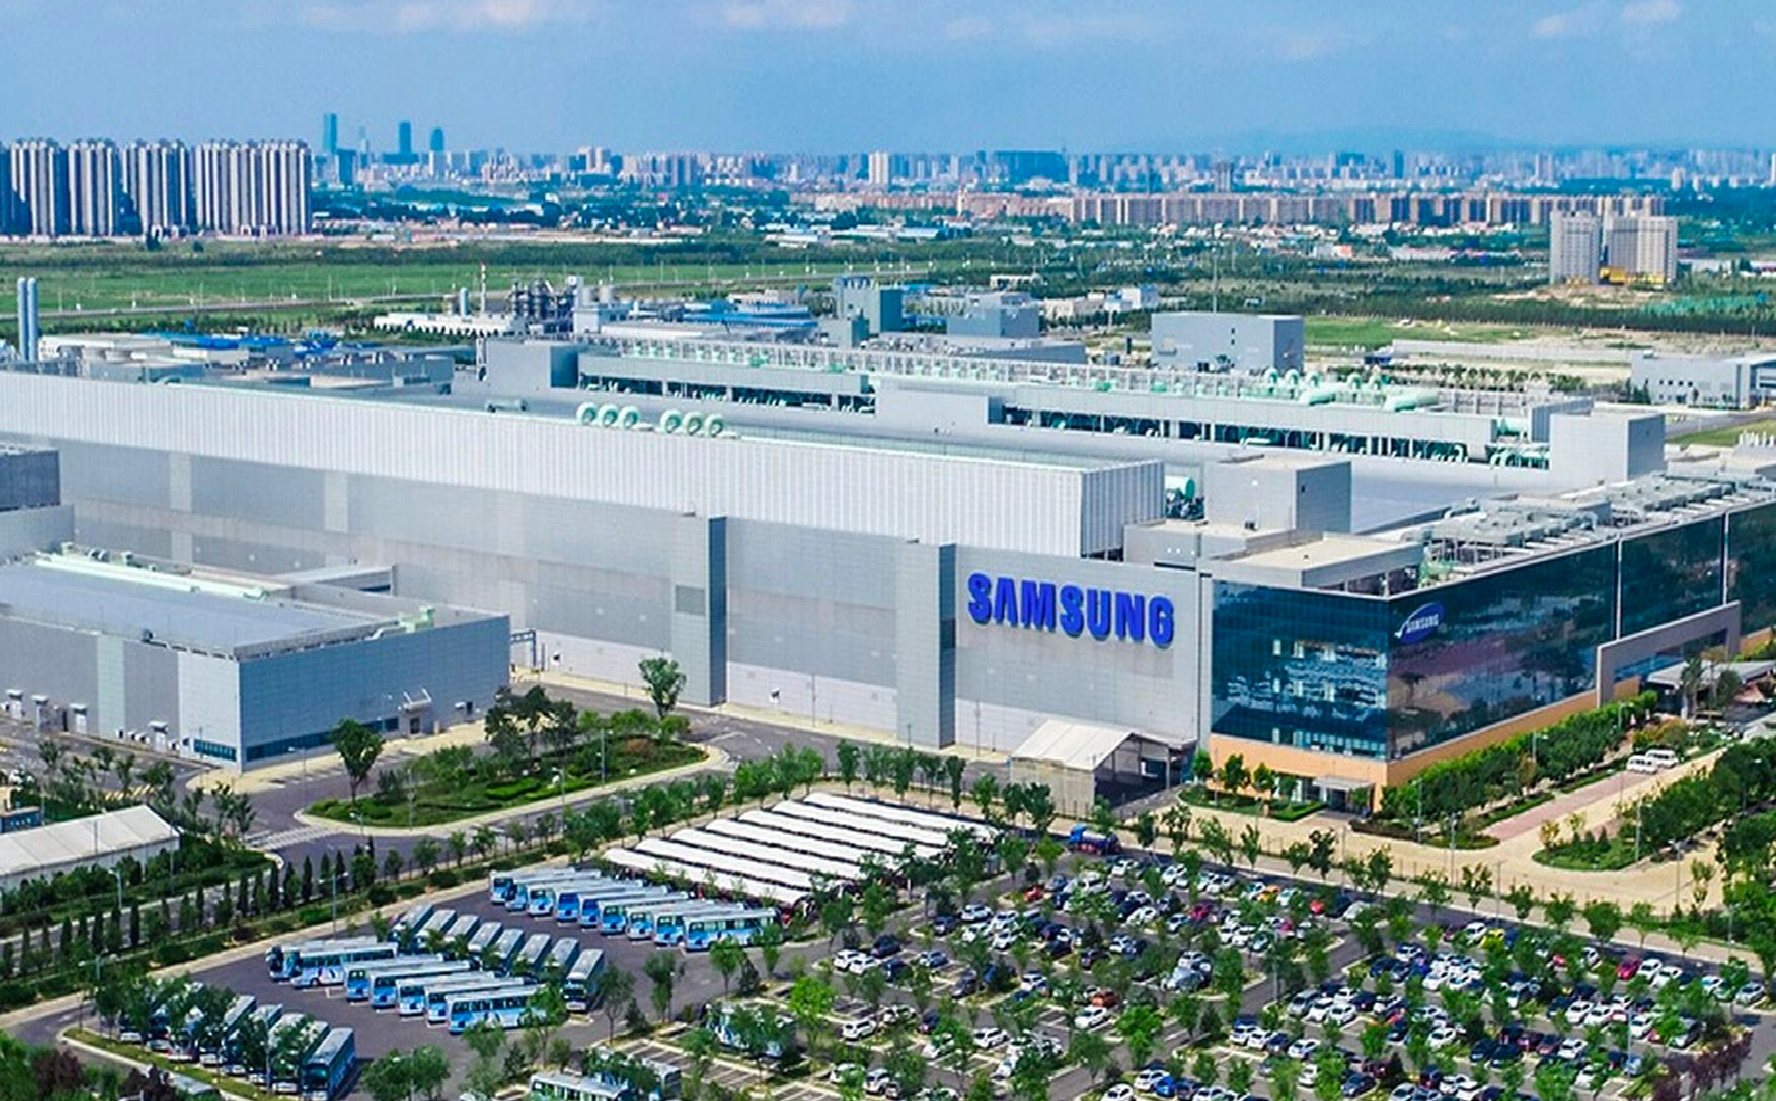 Samsung's semiconductor factory in China